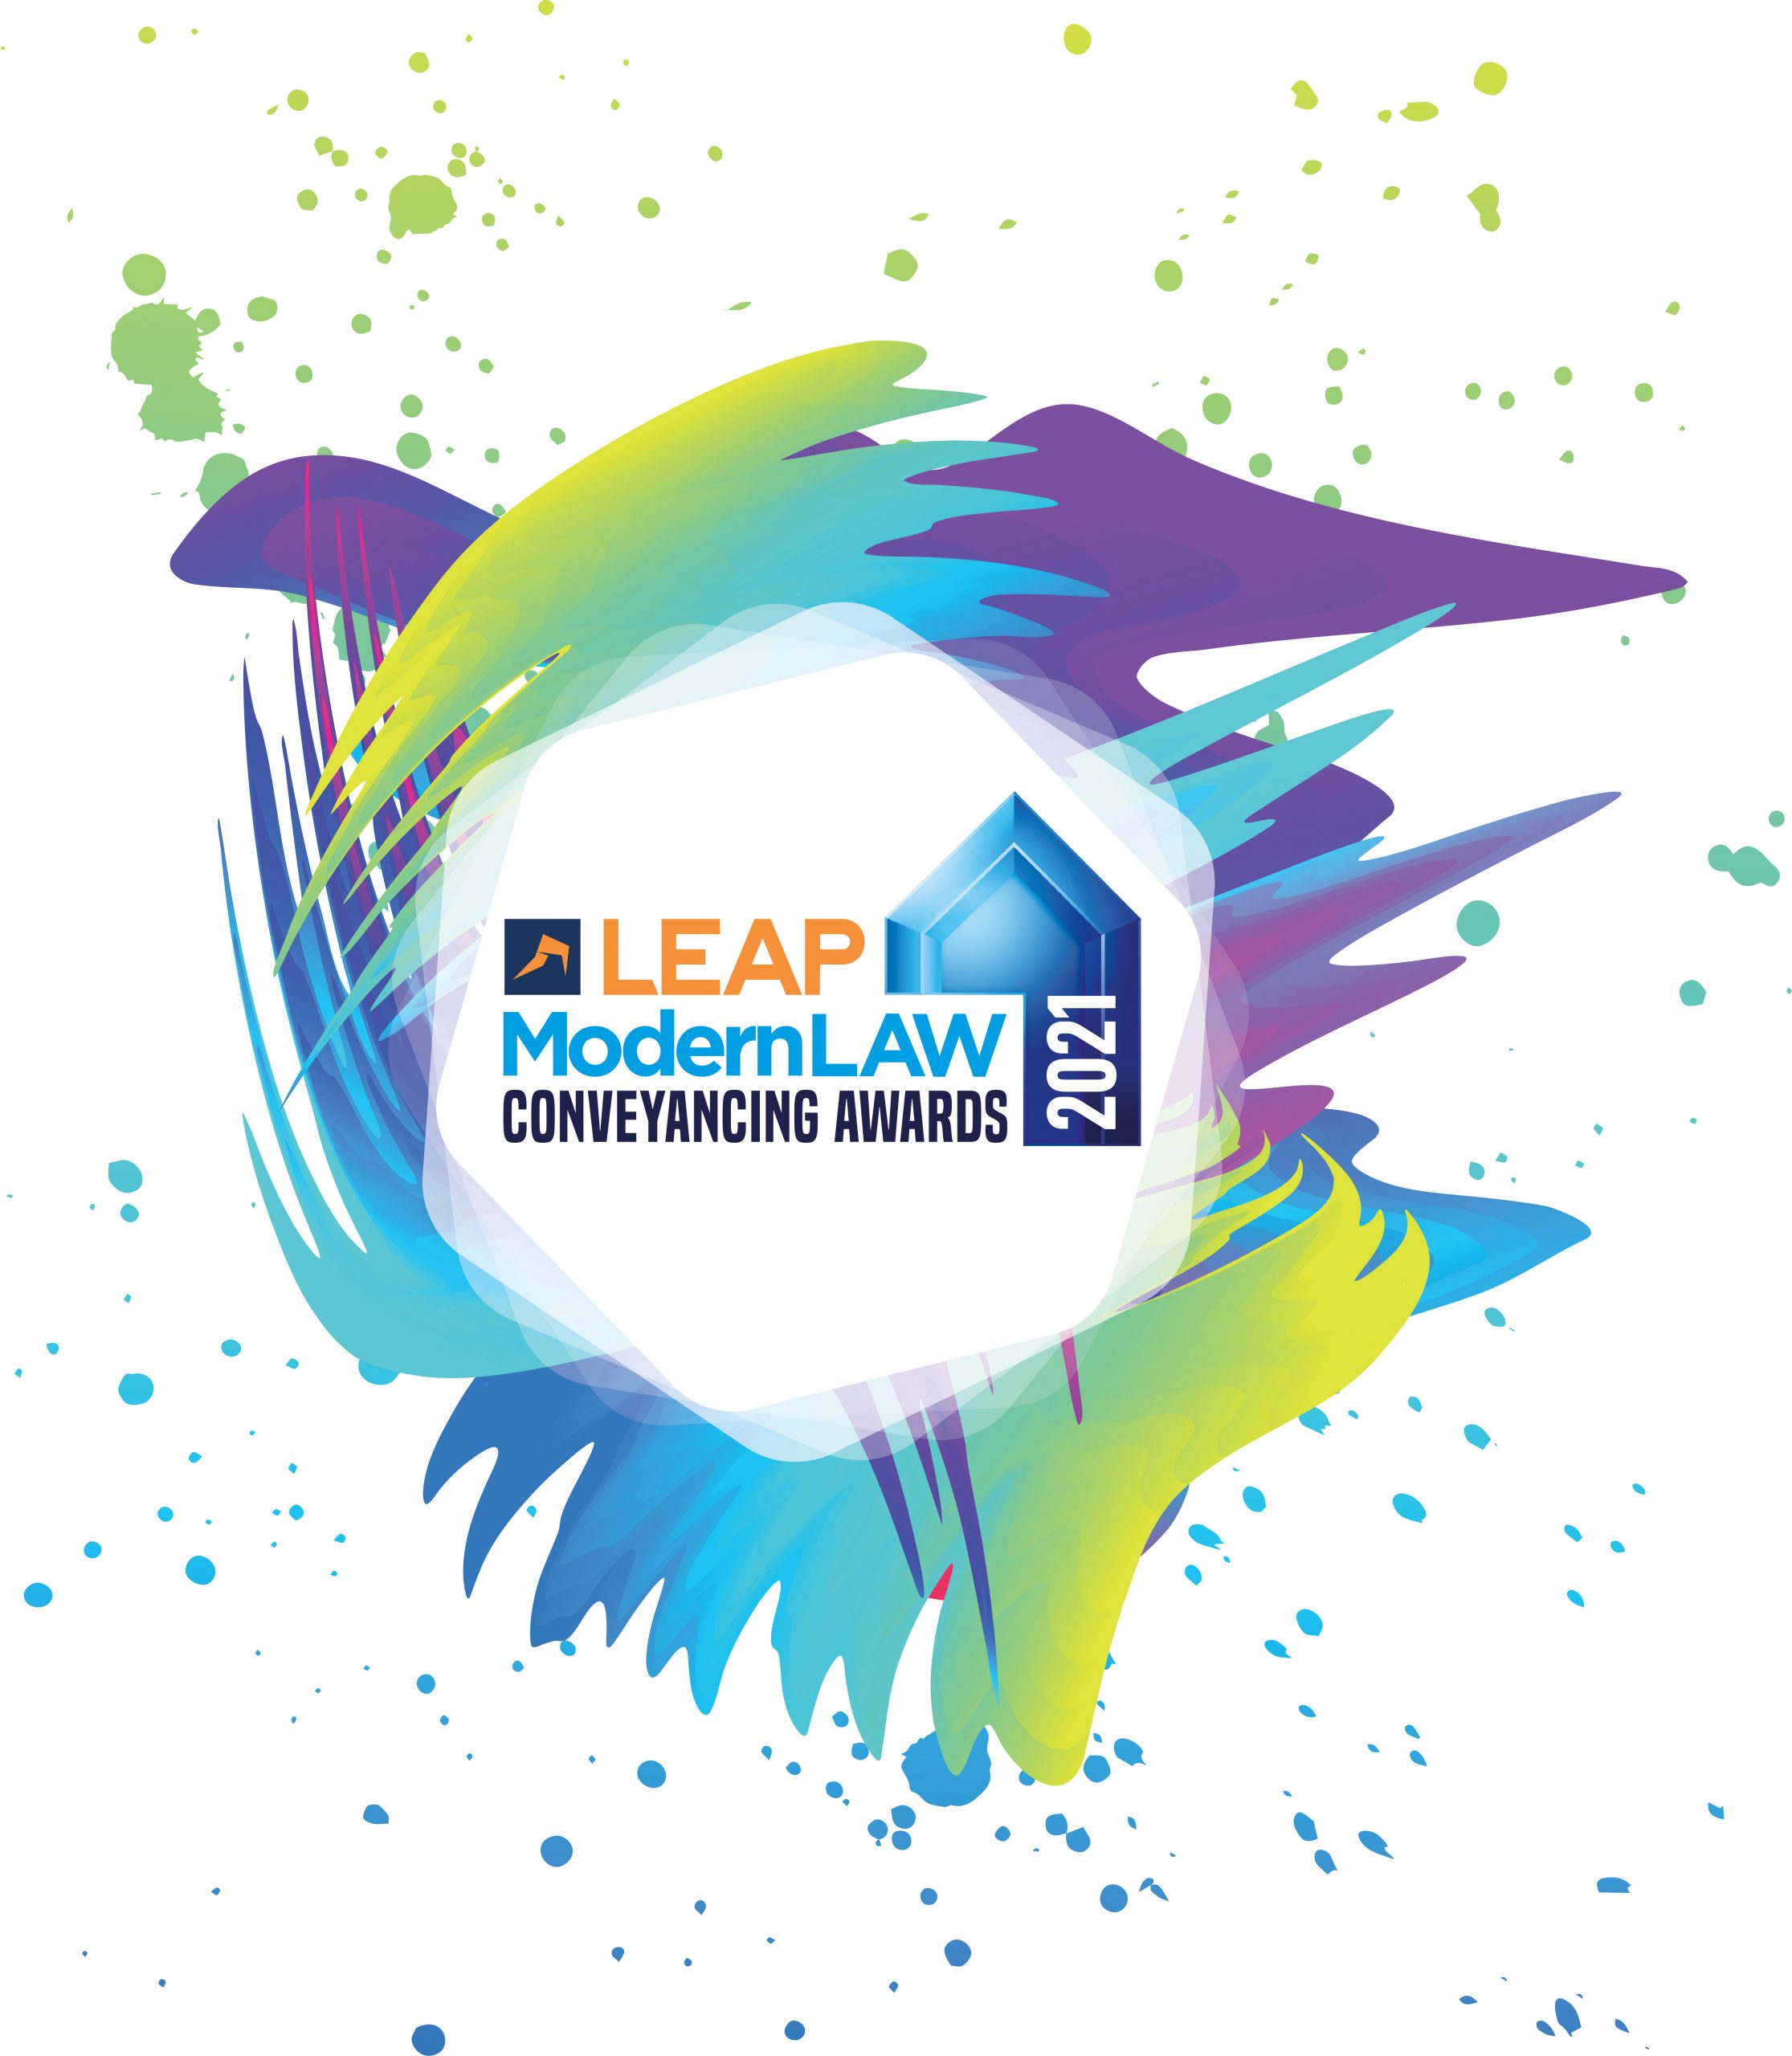 LEAP MODERN LAW CONVEYANCING AWARDS 2021